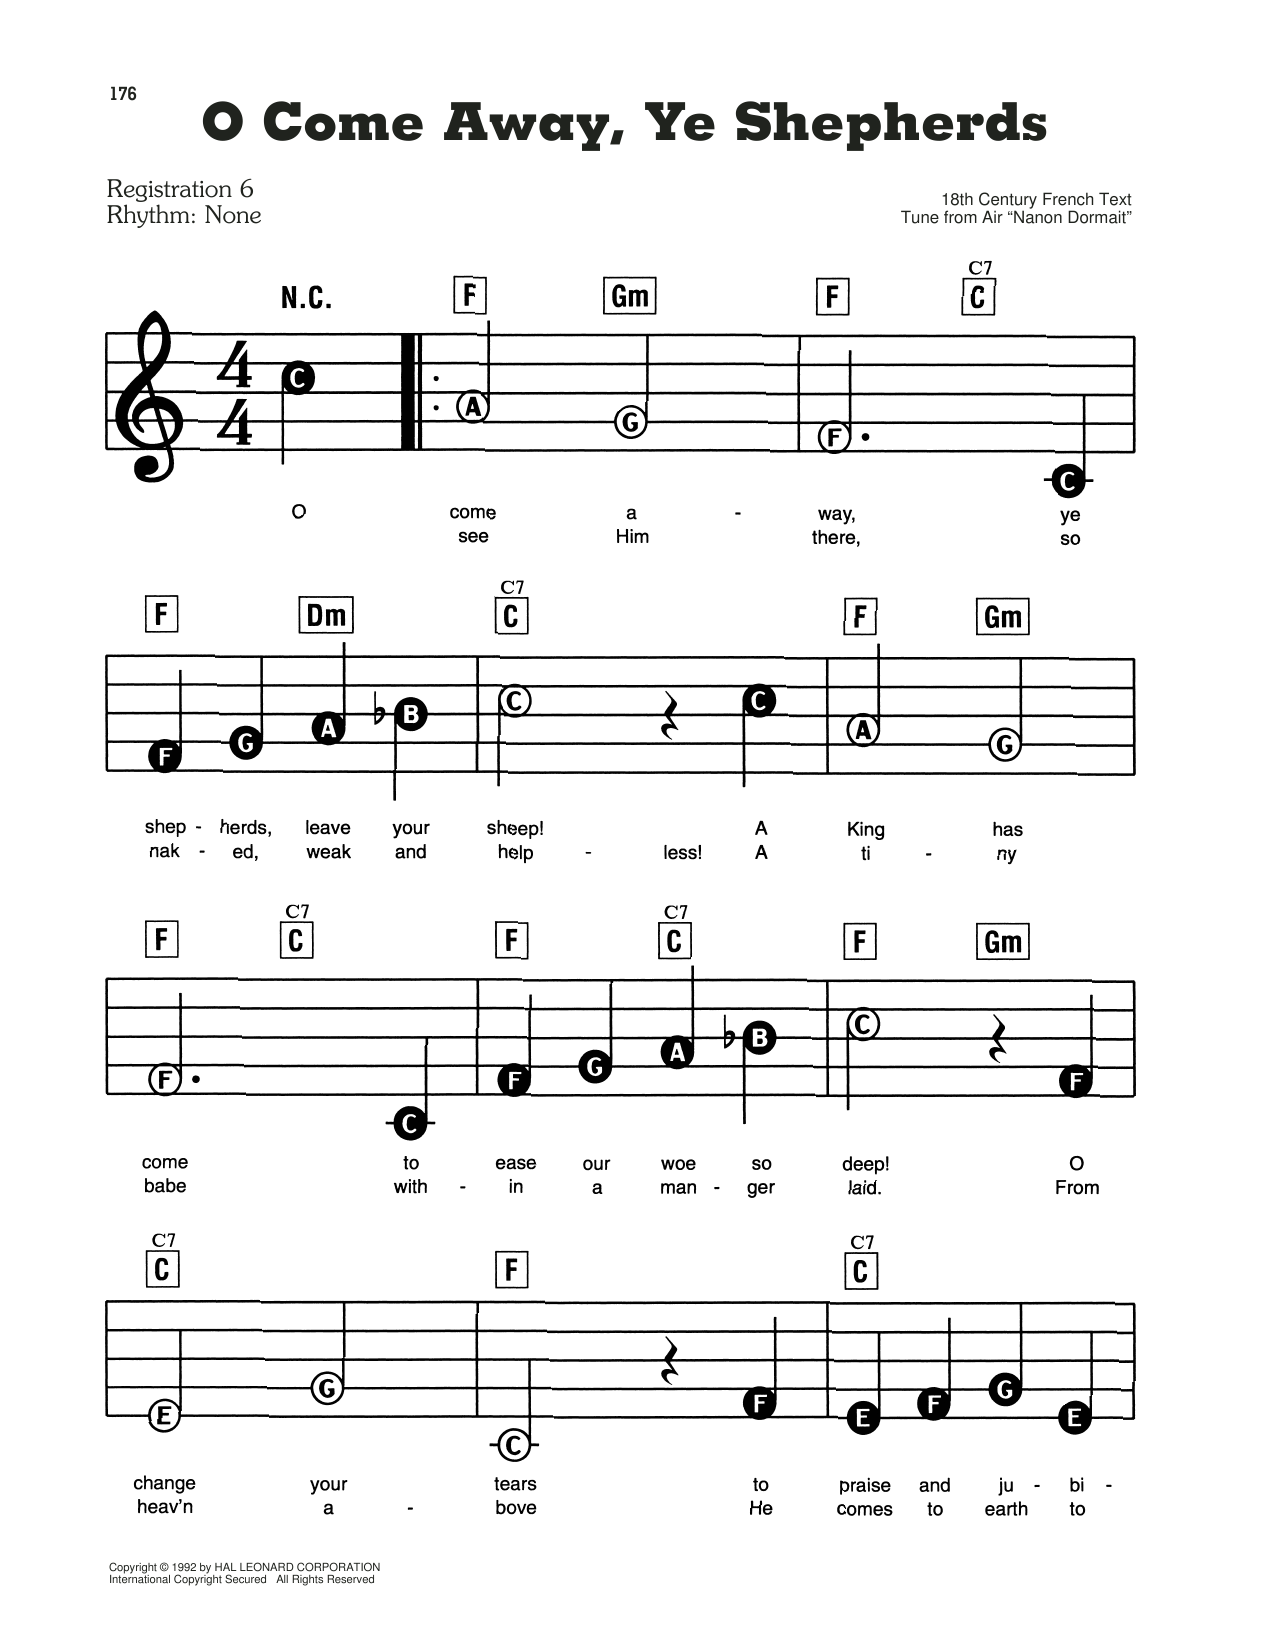 18th Century French O Come Away, Ye Shepherds sheet music preview music notes and score for E-Z Play Today including 2 page(s)